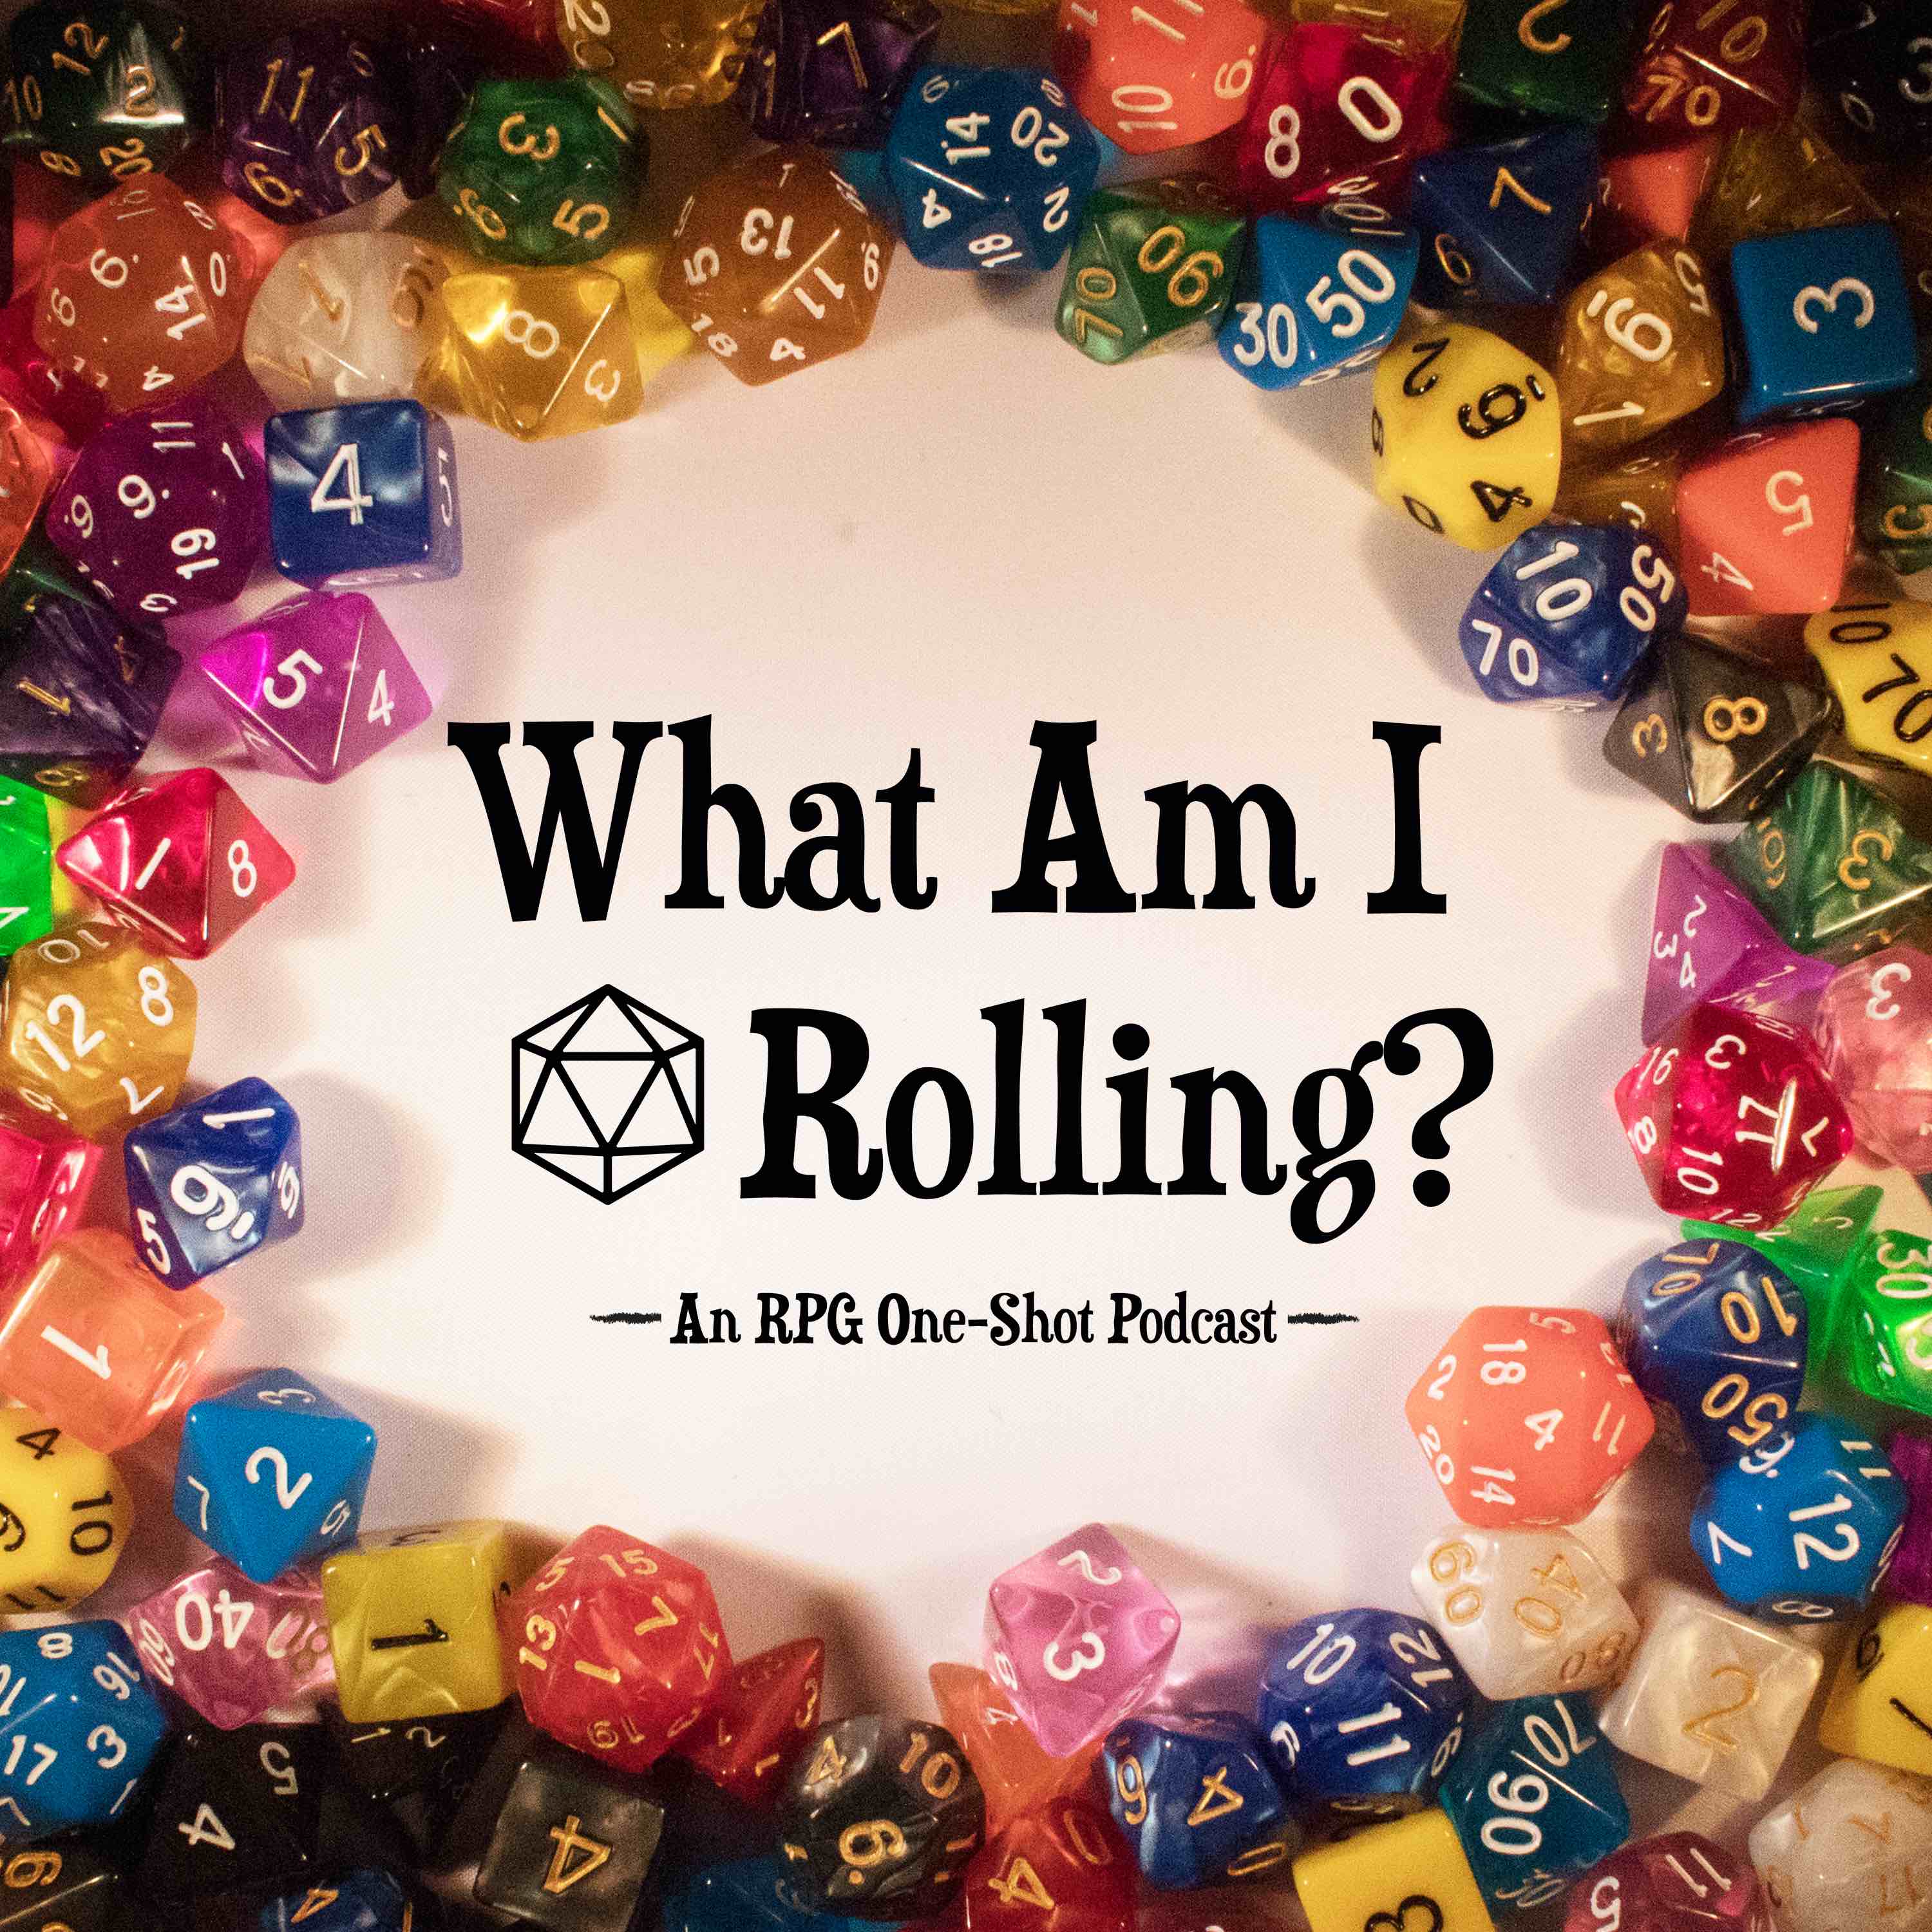 What Am I Rolling?